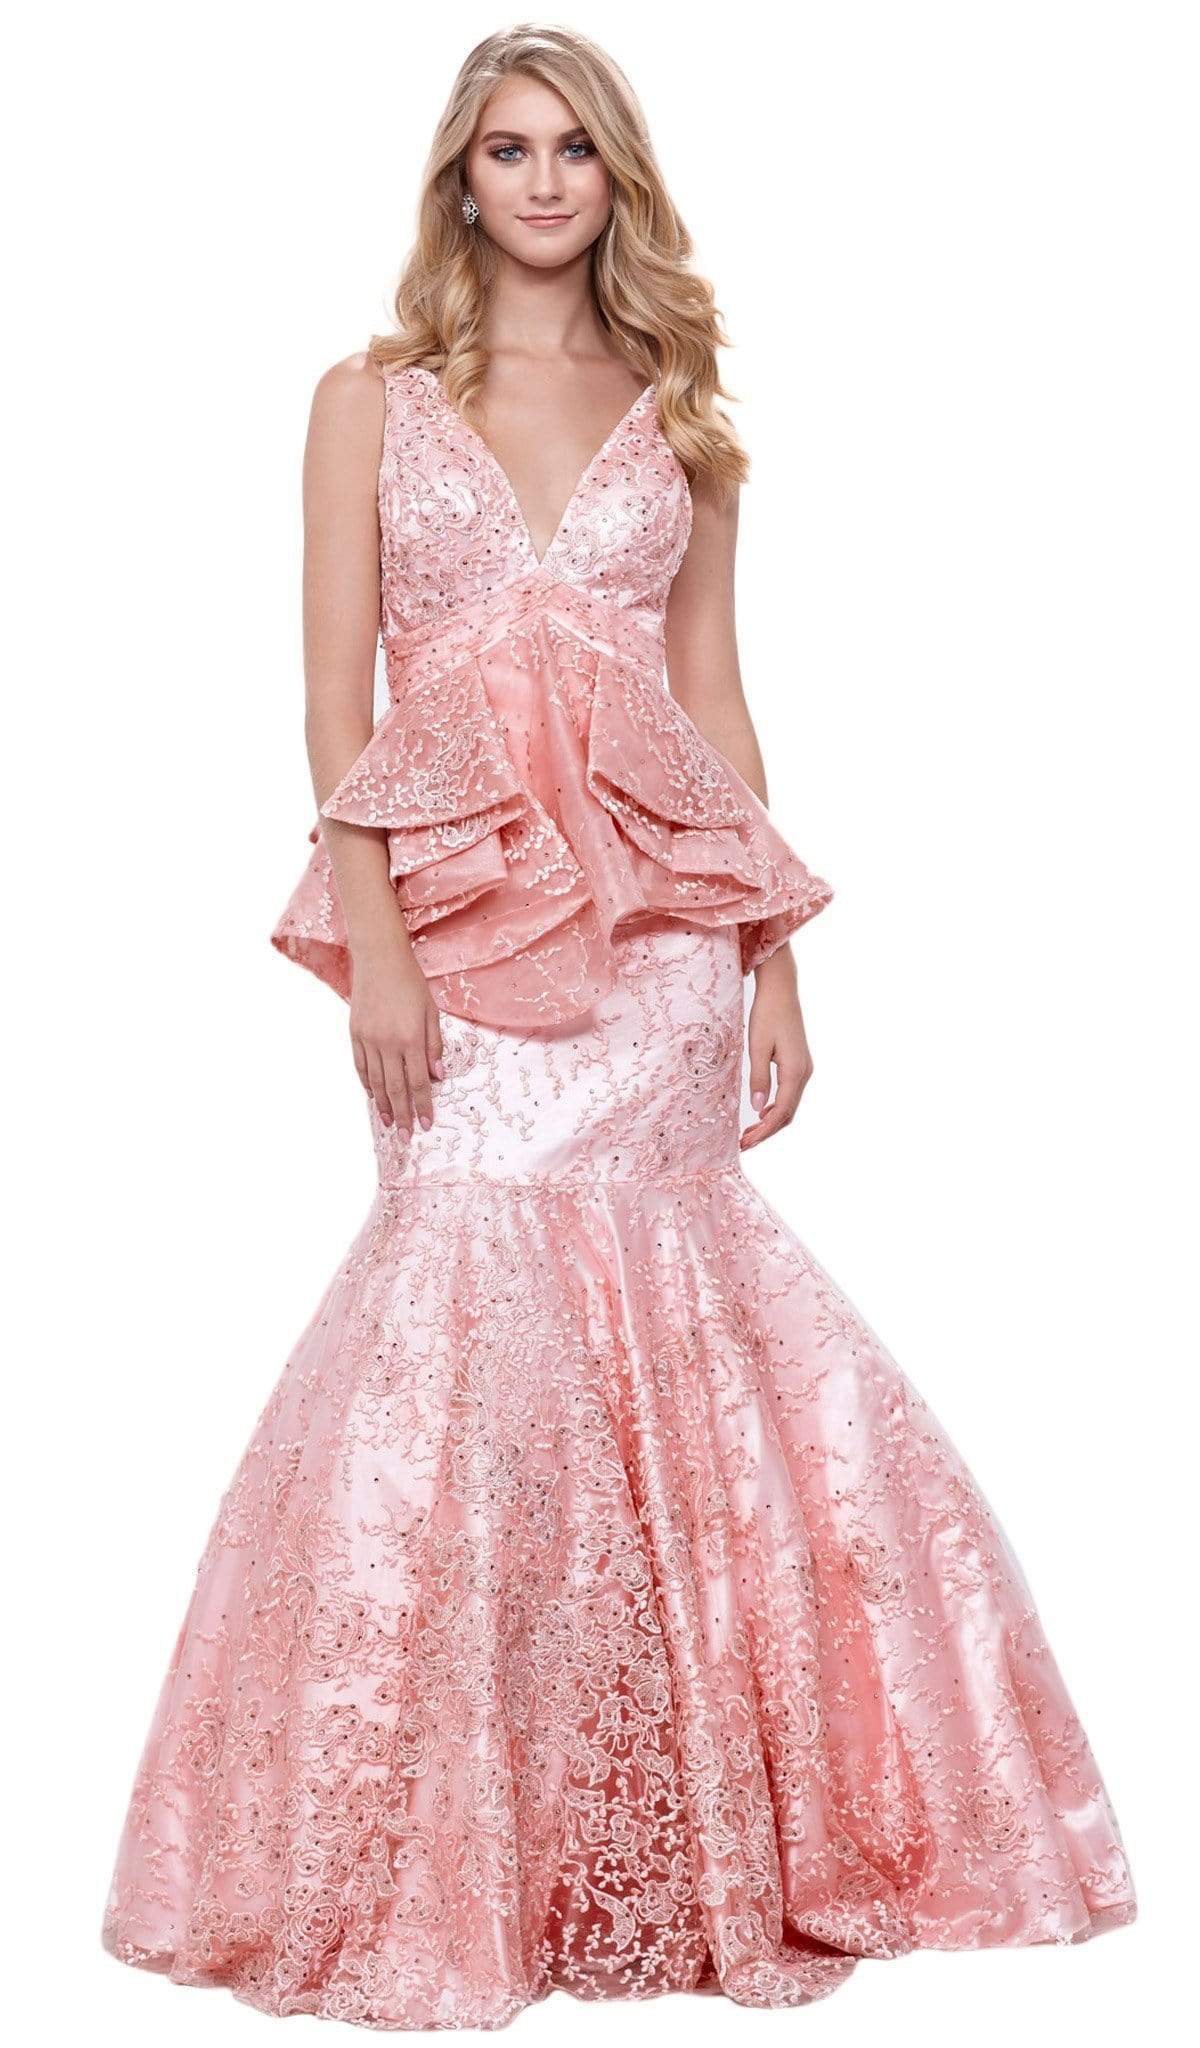 Nox Anabel - 8311 Embellished Sleeveless Ruffled Peplum Evening Gown Special Occasion Dress XS / Bashful Pink